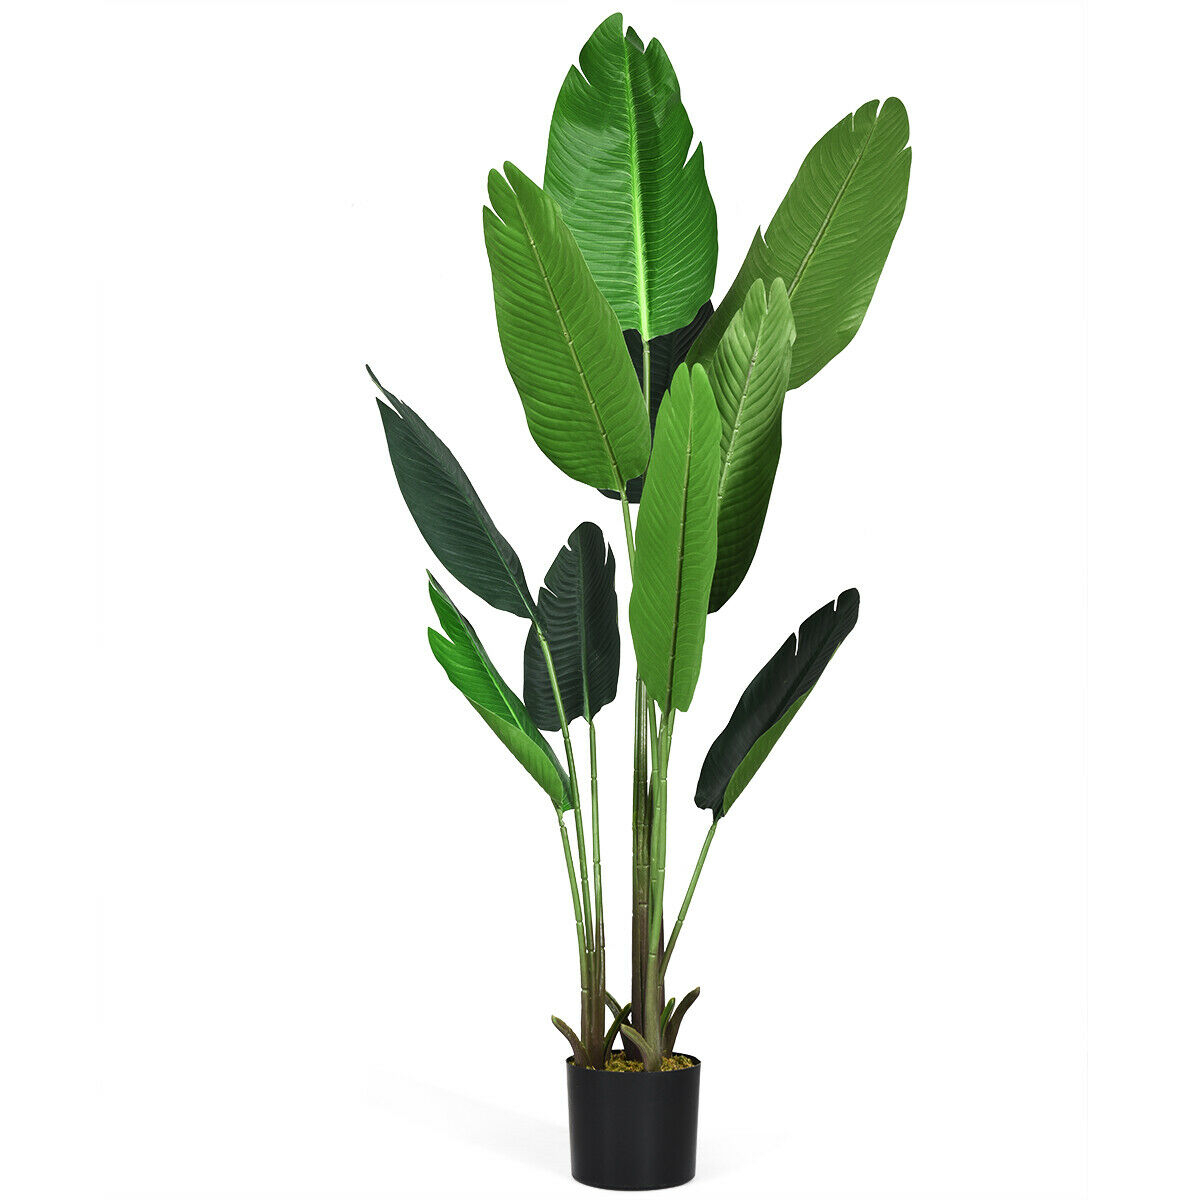 5.3ft Artificial Tropical Palm Tree Green Indoor-Outdoor Home Decorative Planter